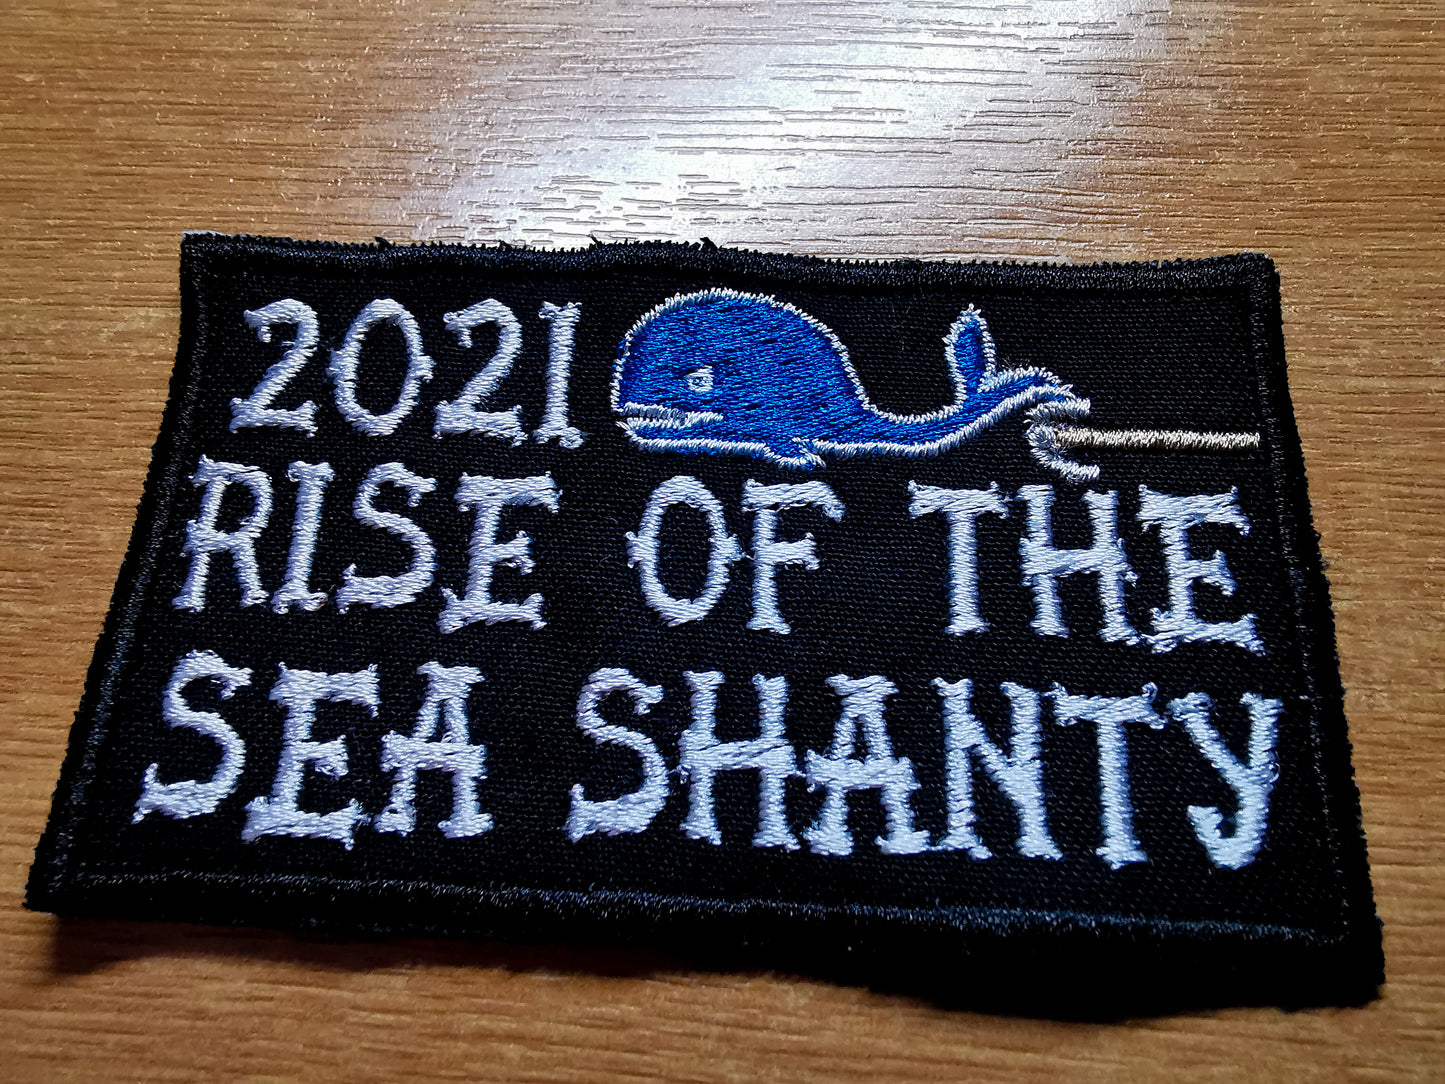 Sea Shanty Embroidered Patch Commemorative Rise of the Sea Shanty 2021